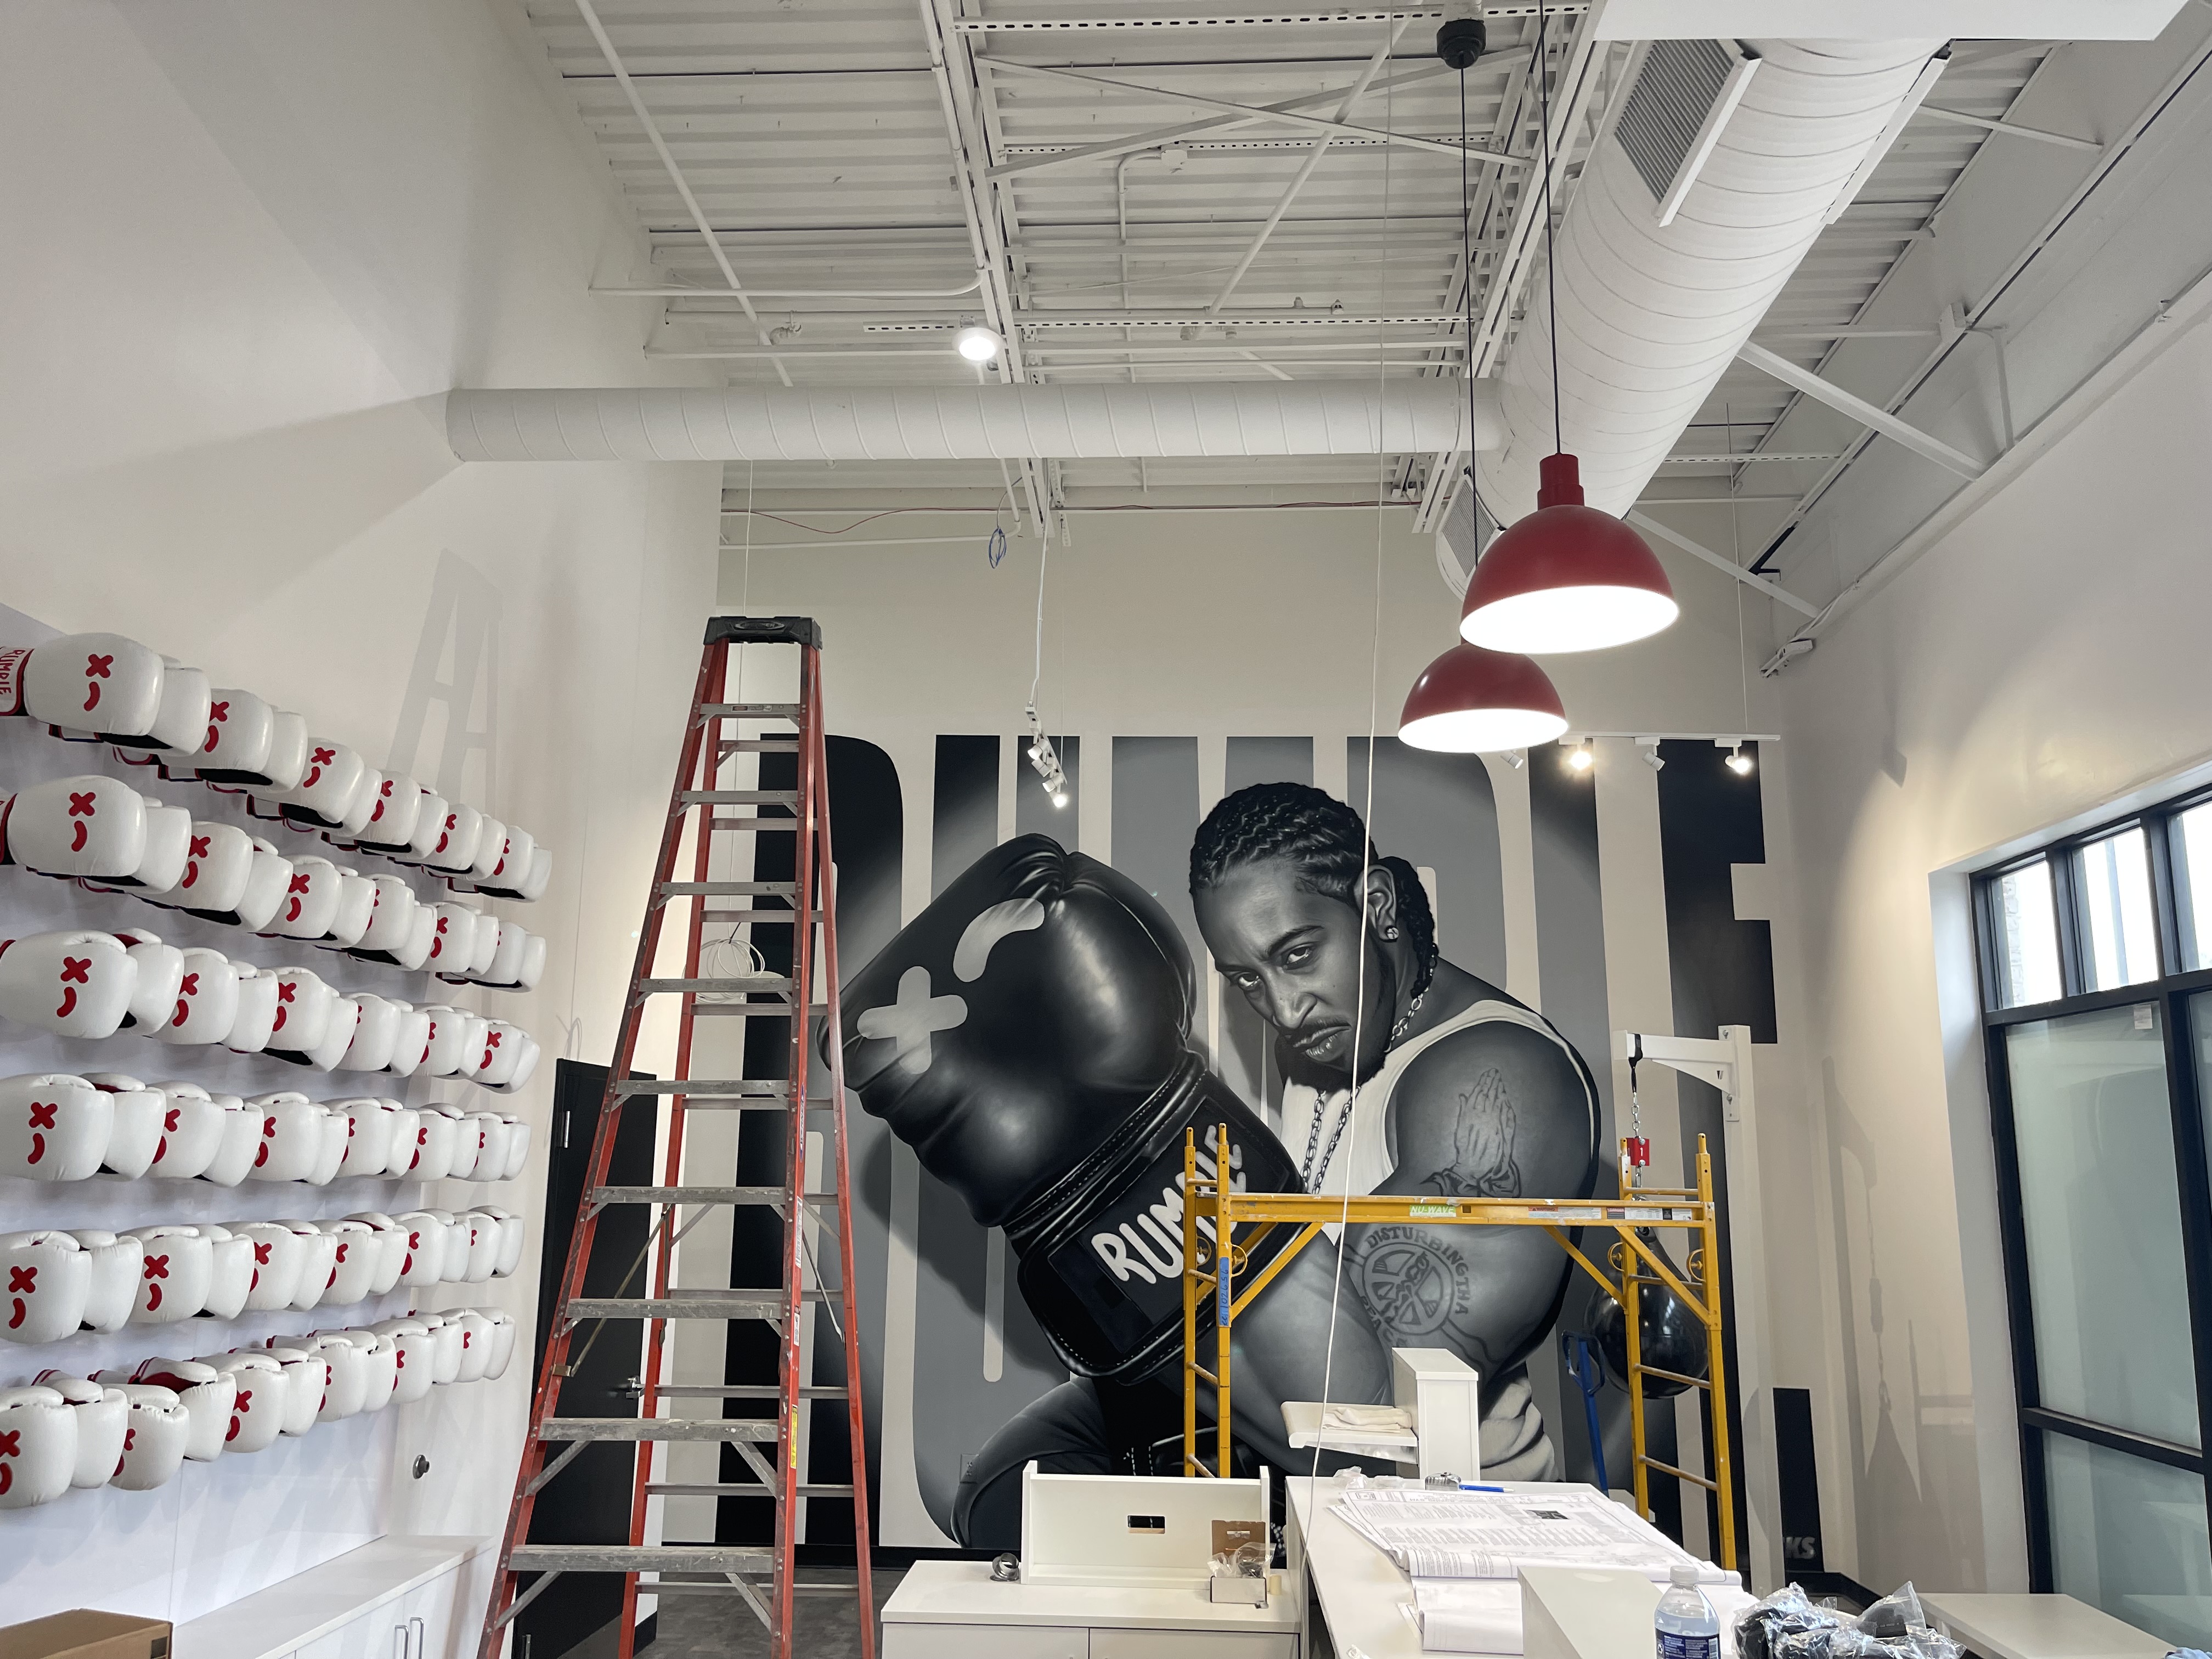 Rumble Boxing Gym